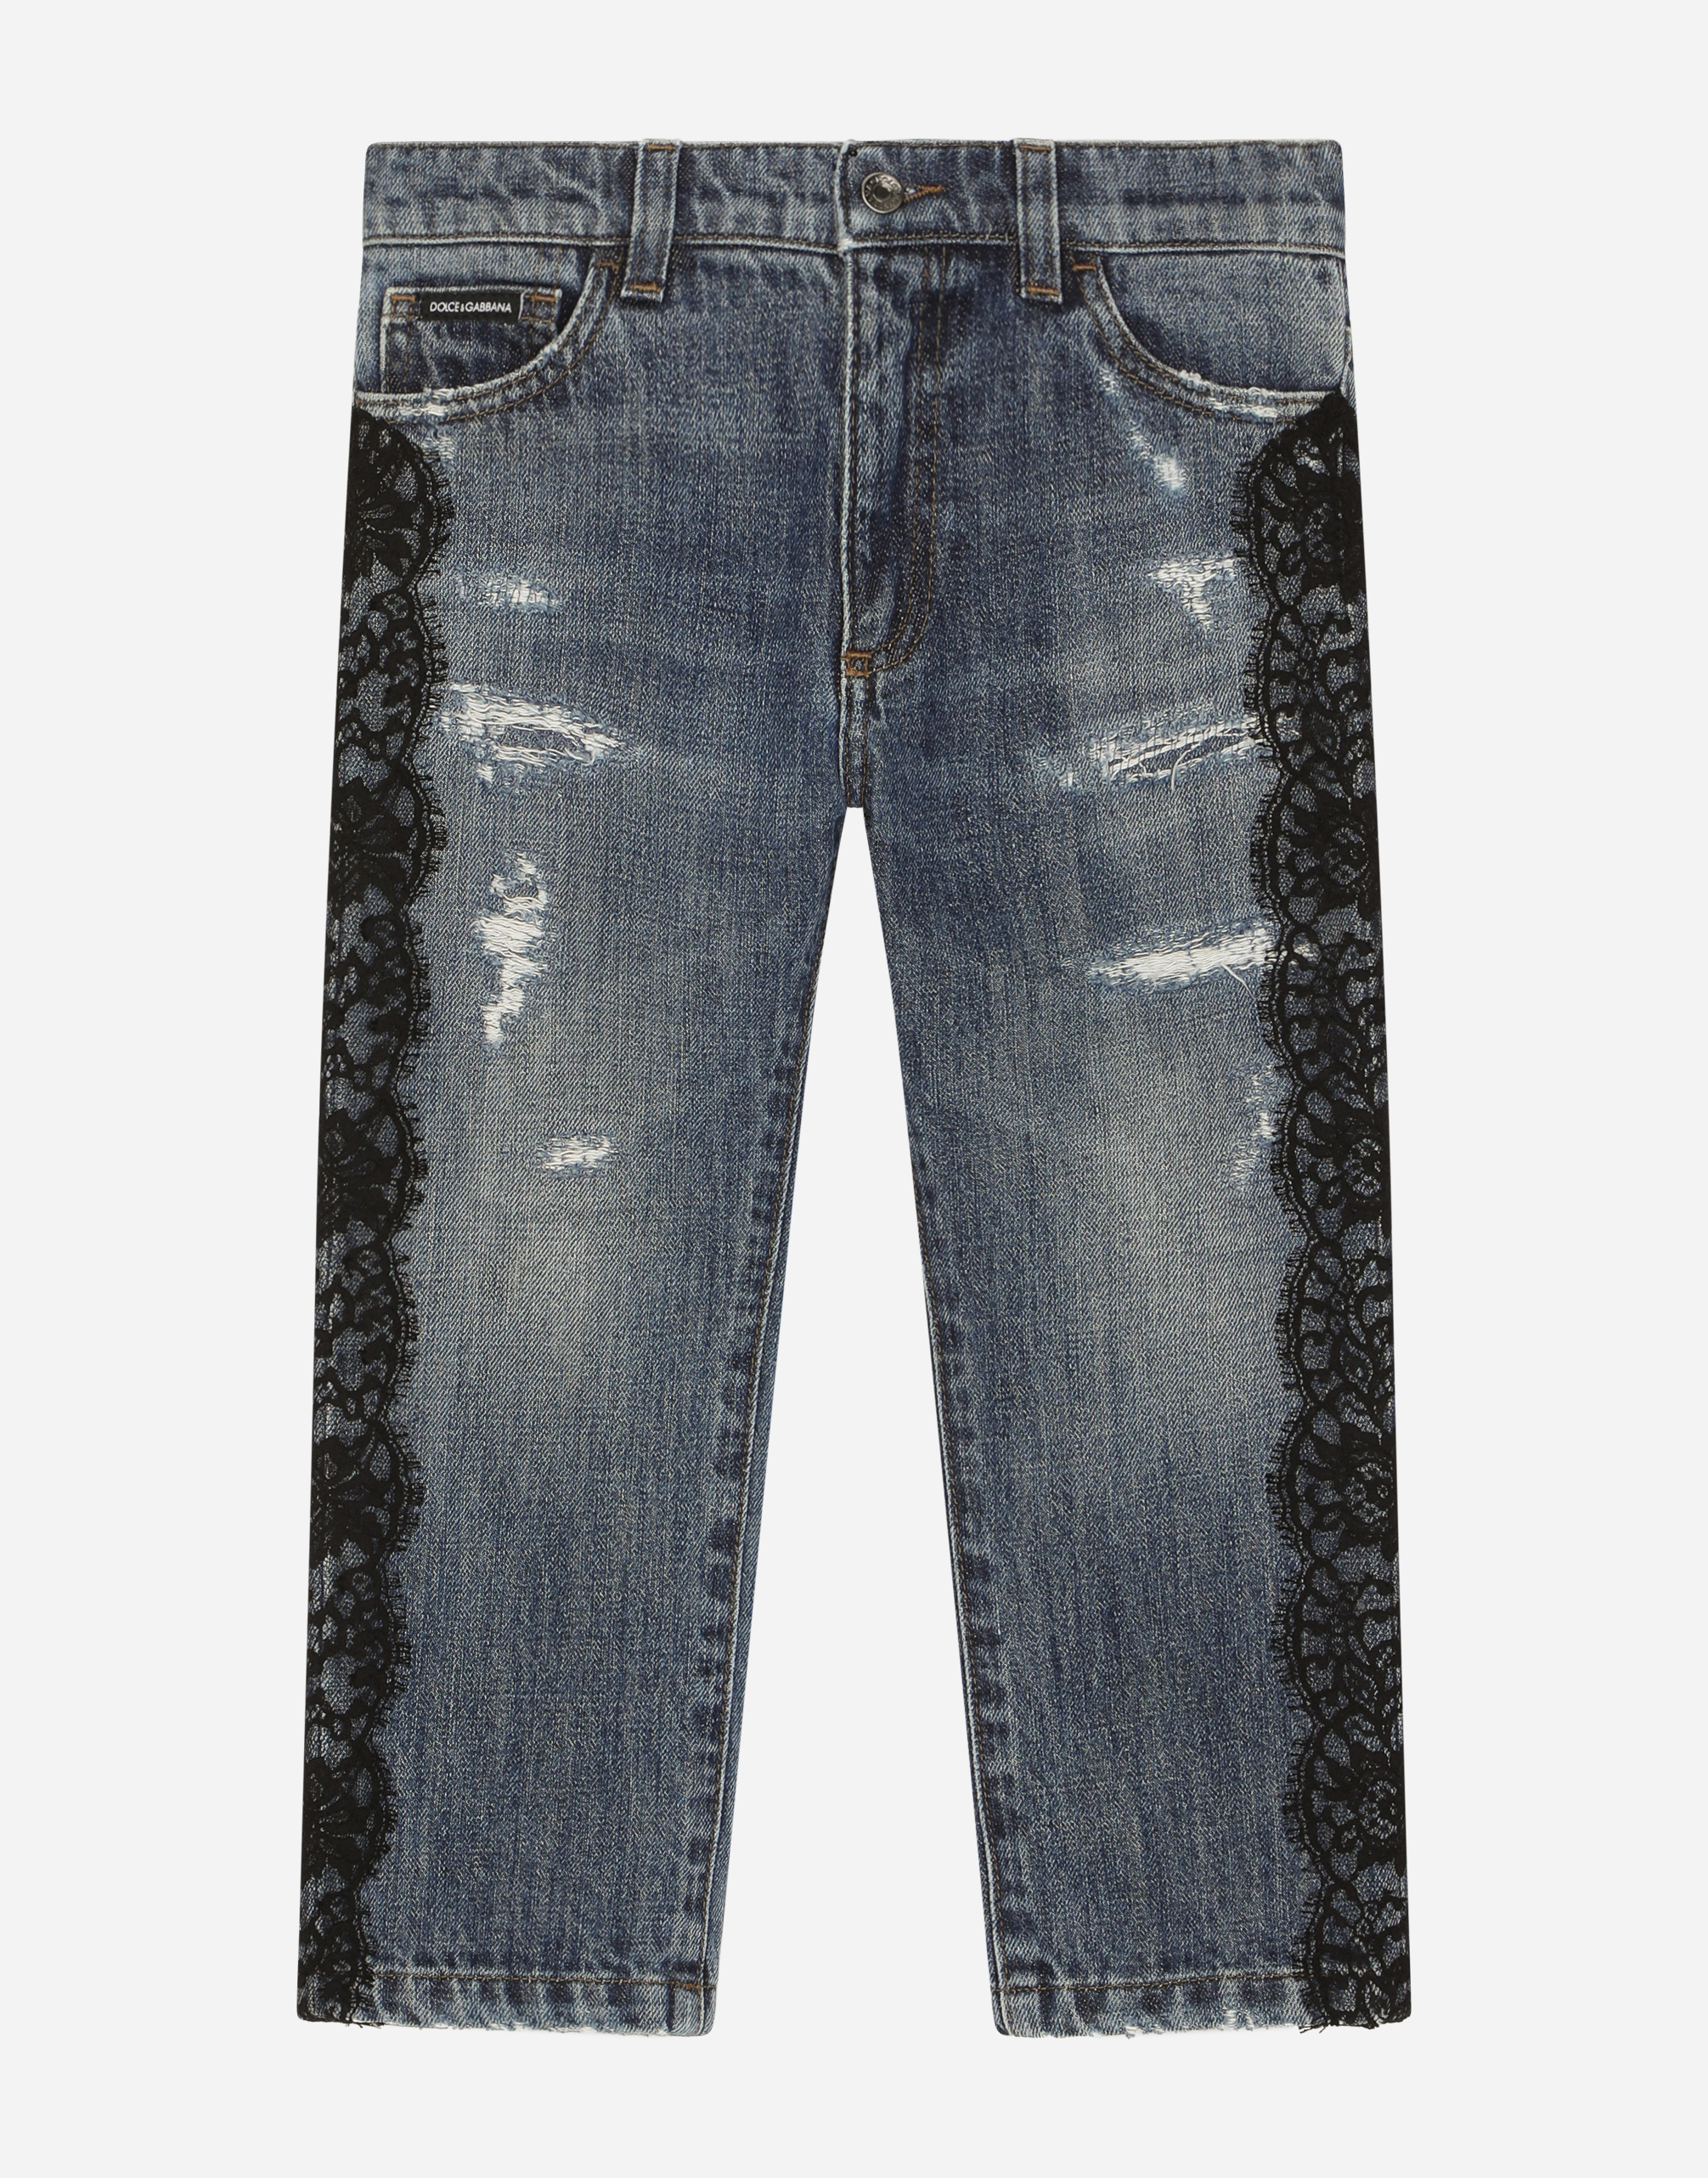 Denim jeans with lace bands in Multicolor